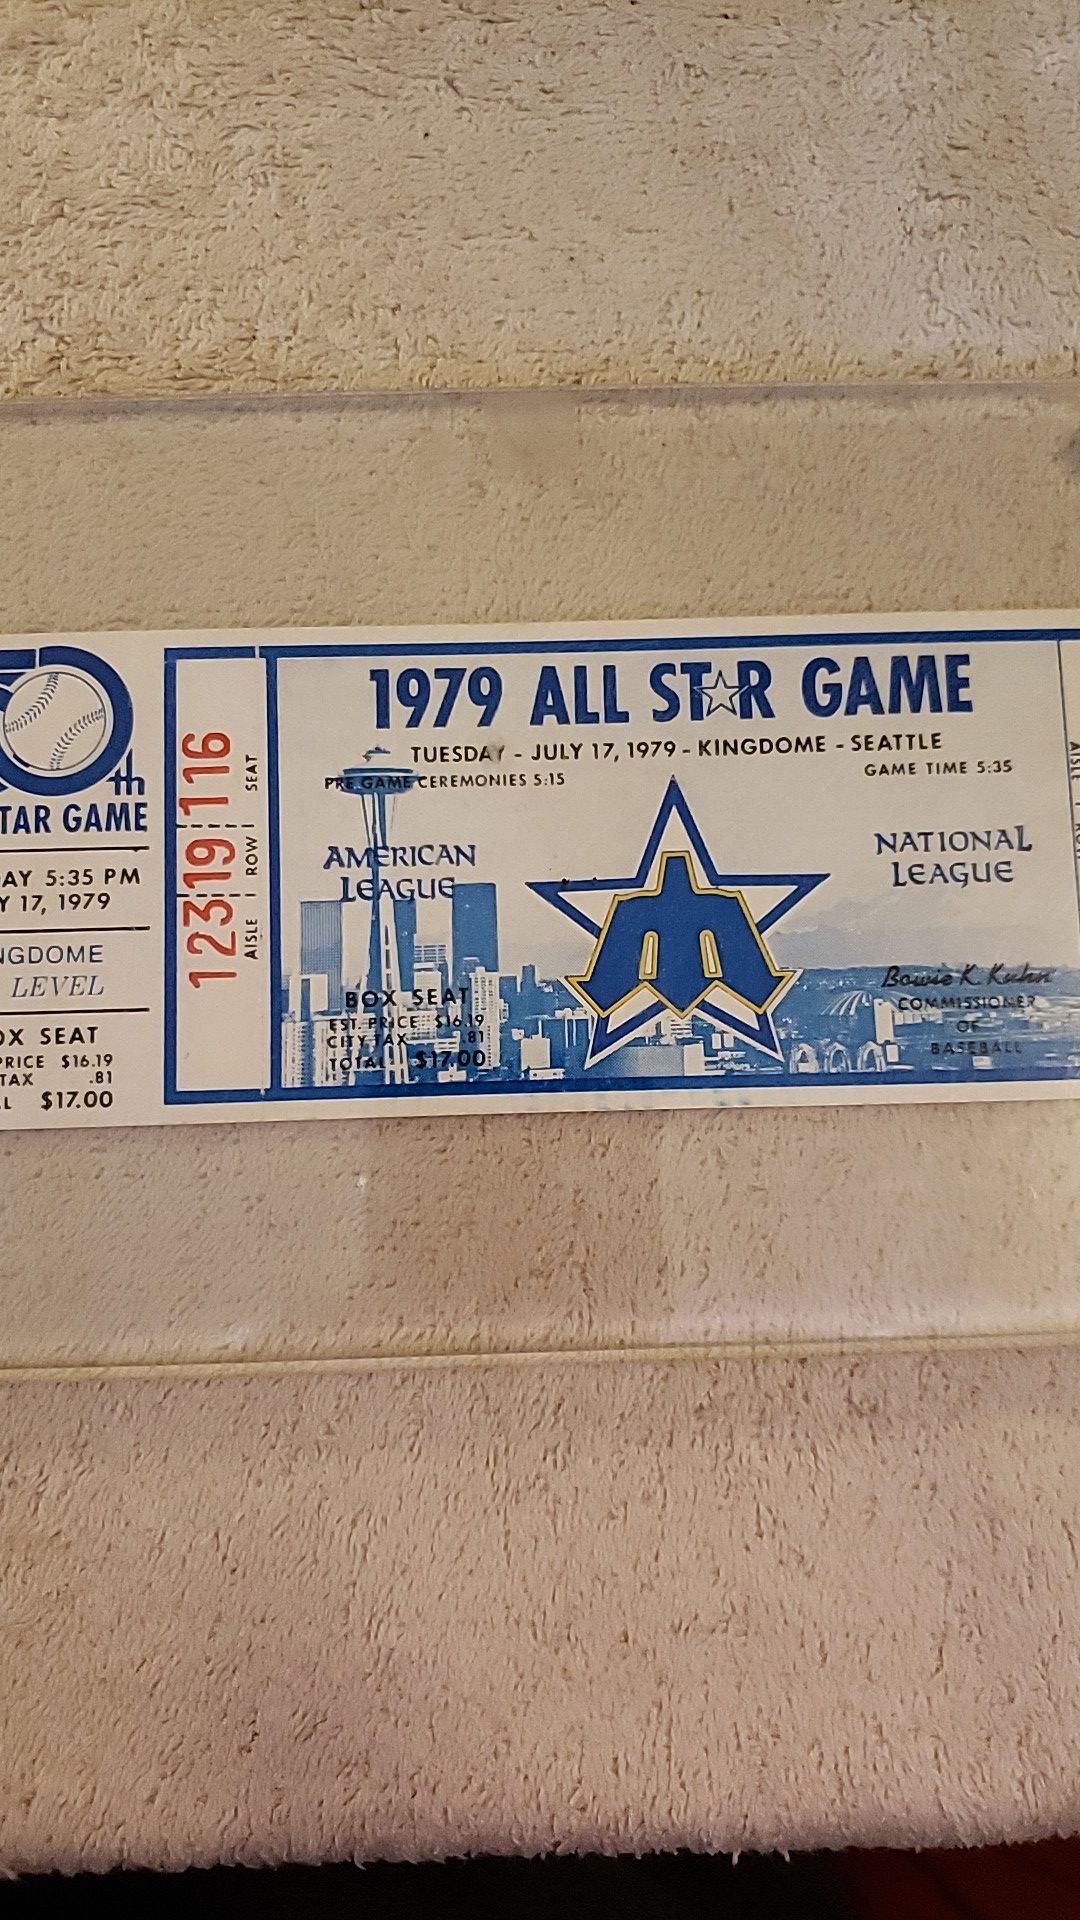 Unused ticket from 1979 all-star game in Kingdome